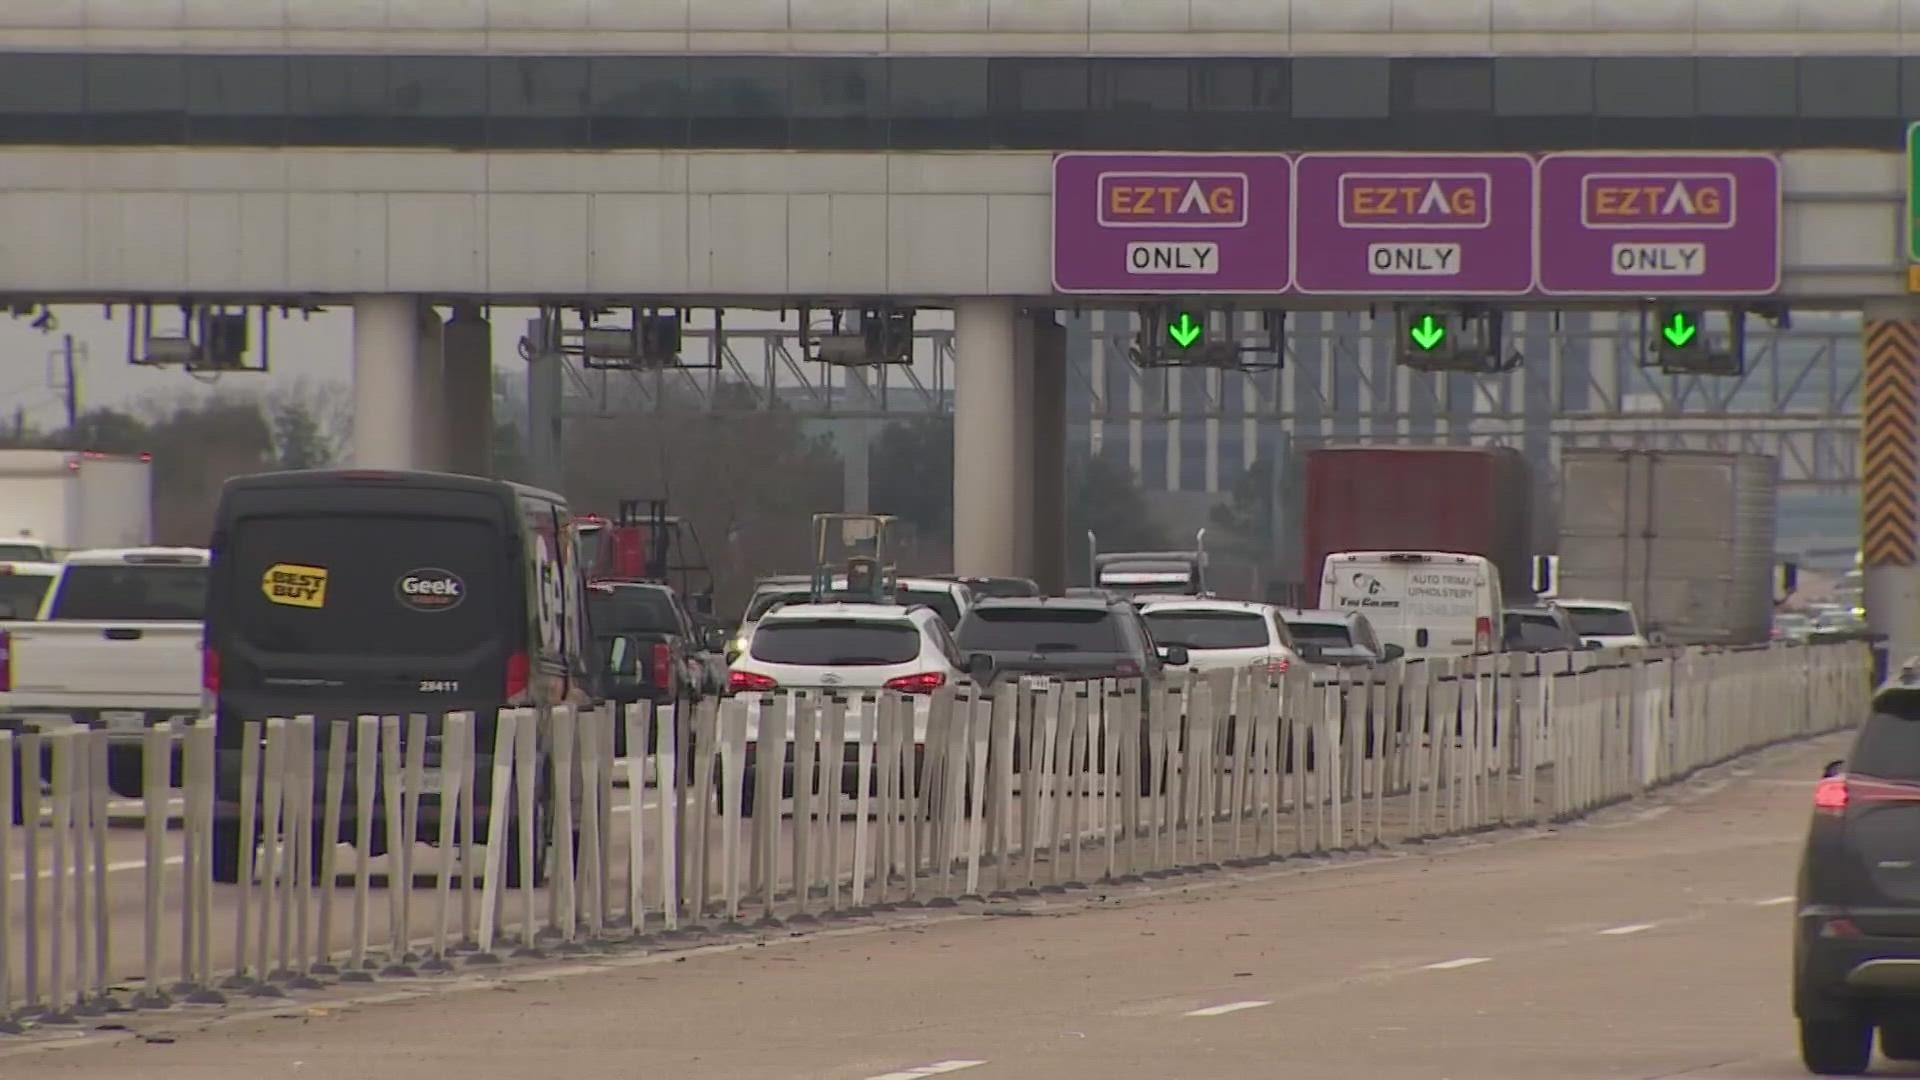 Drivers will save 10 percent on toll roads that are managed by the Harris County Toll Road Authority, including the Sam Houston and Westpark tollways.